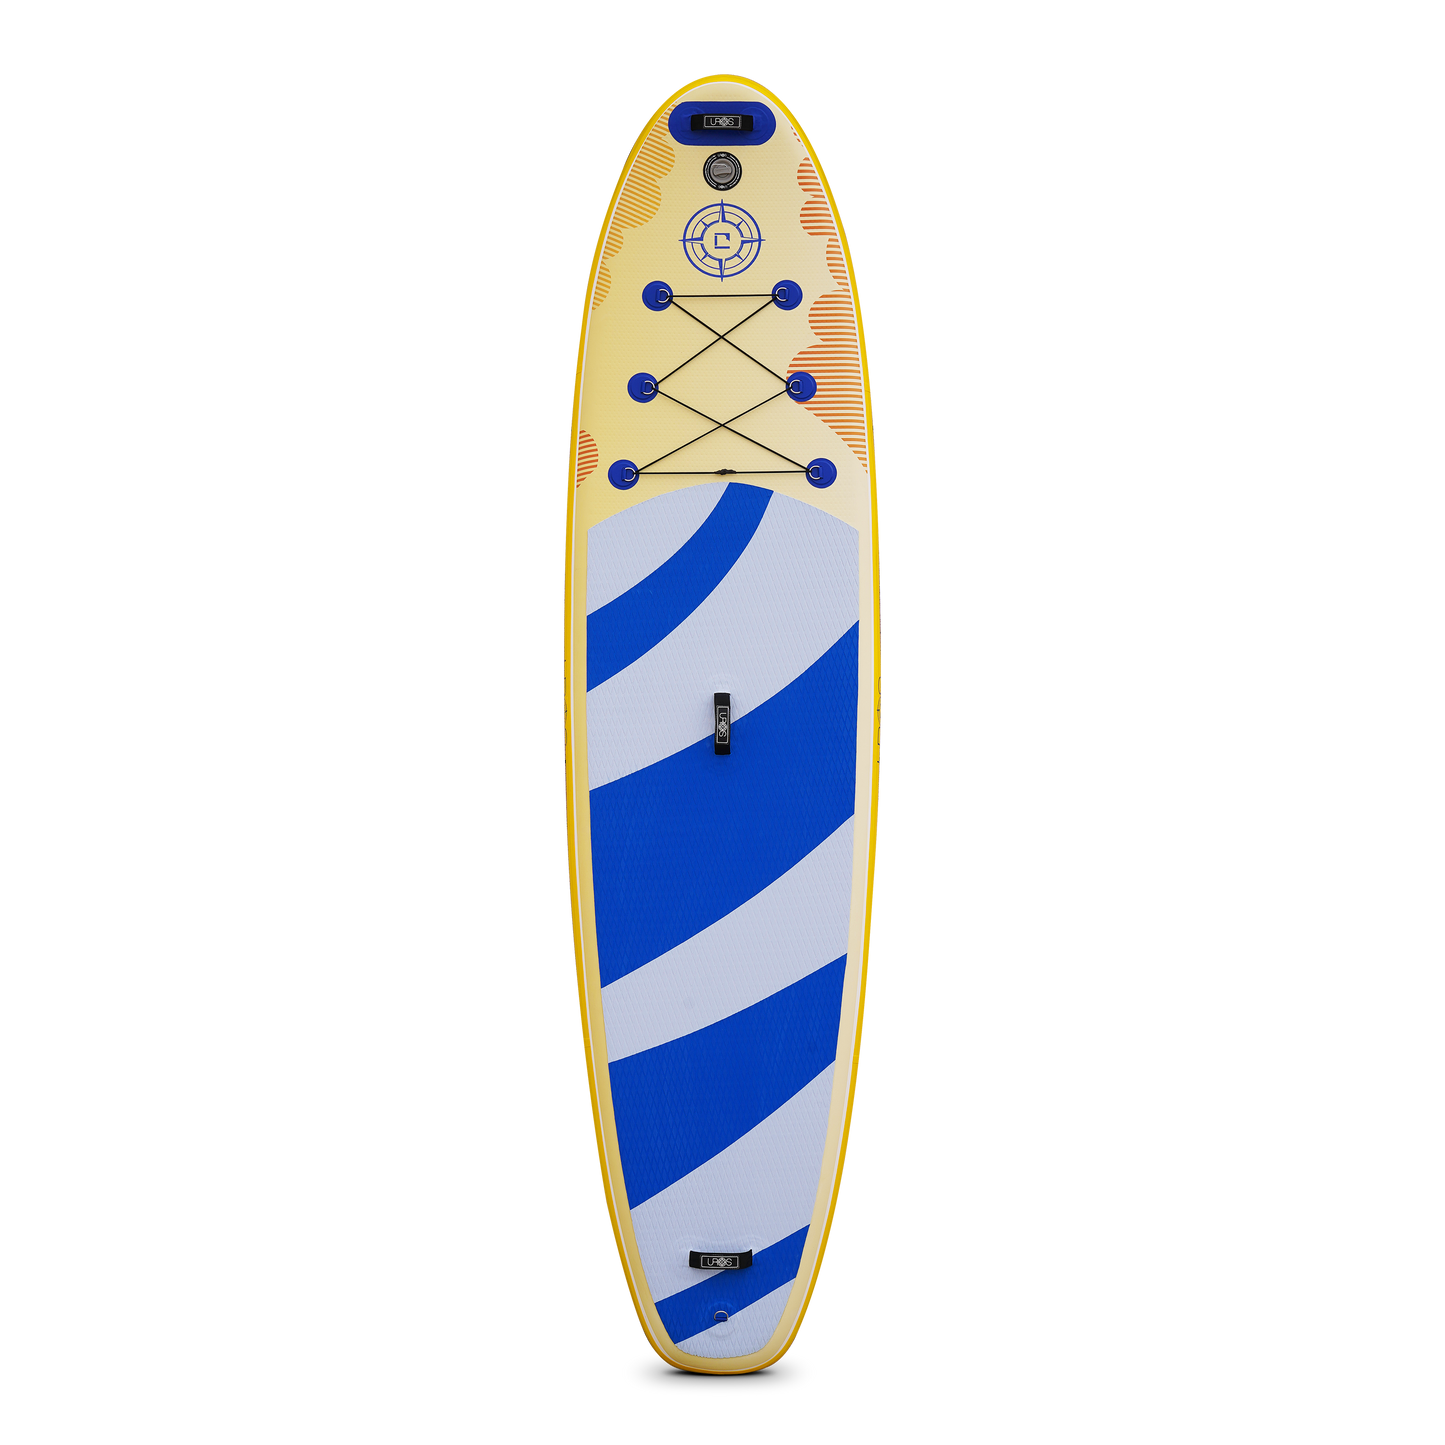 Best Inflatable Paddle Board Blue & Tan Wave Design 